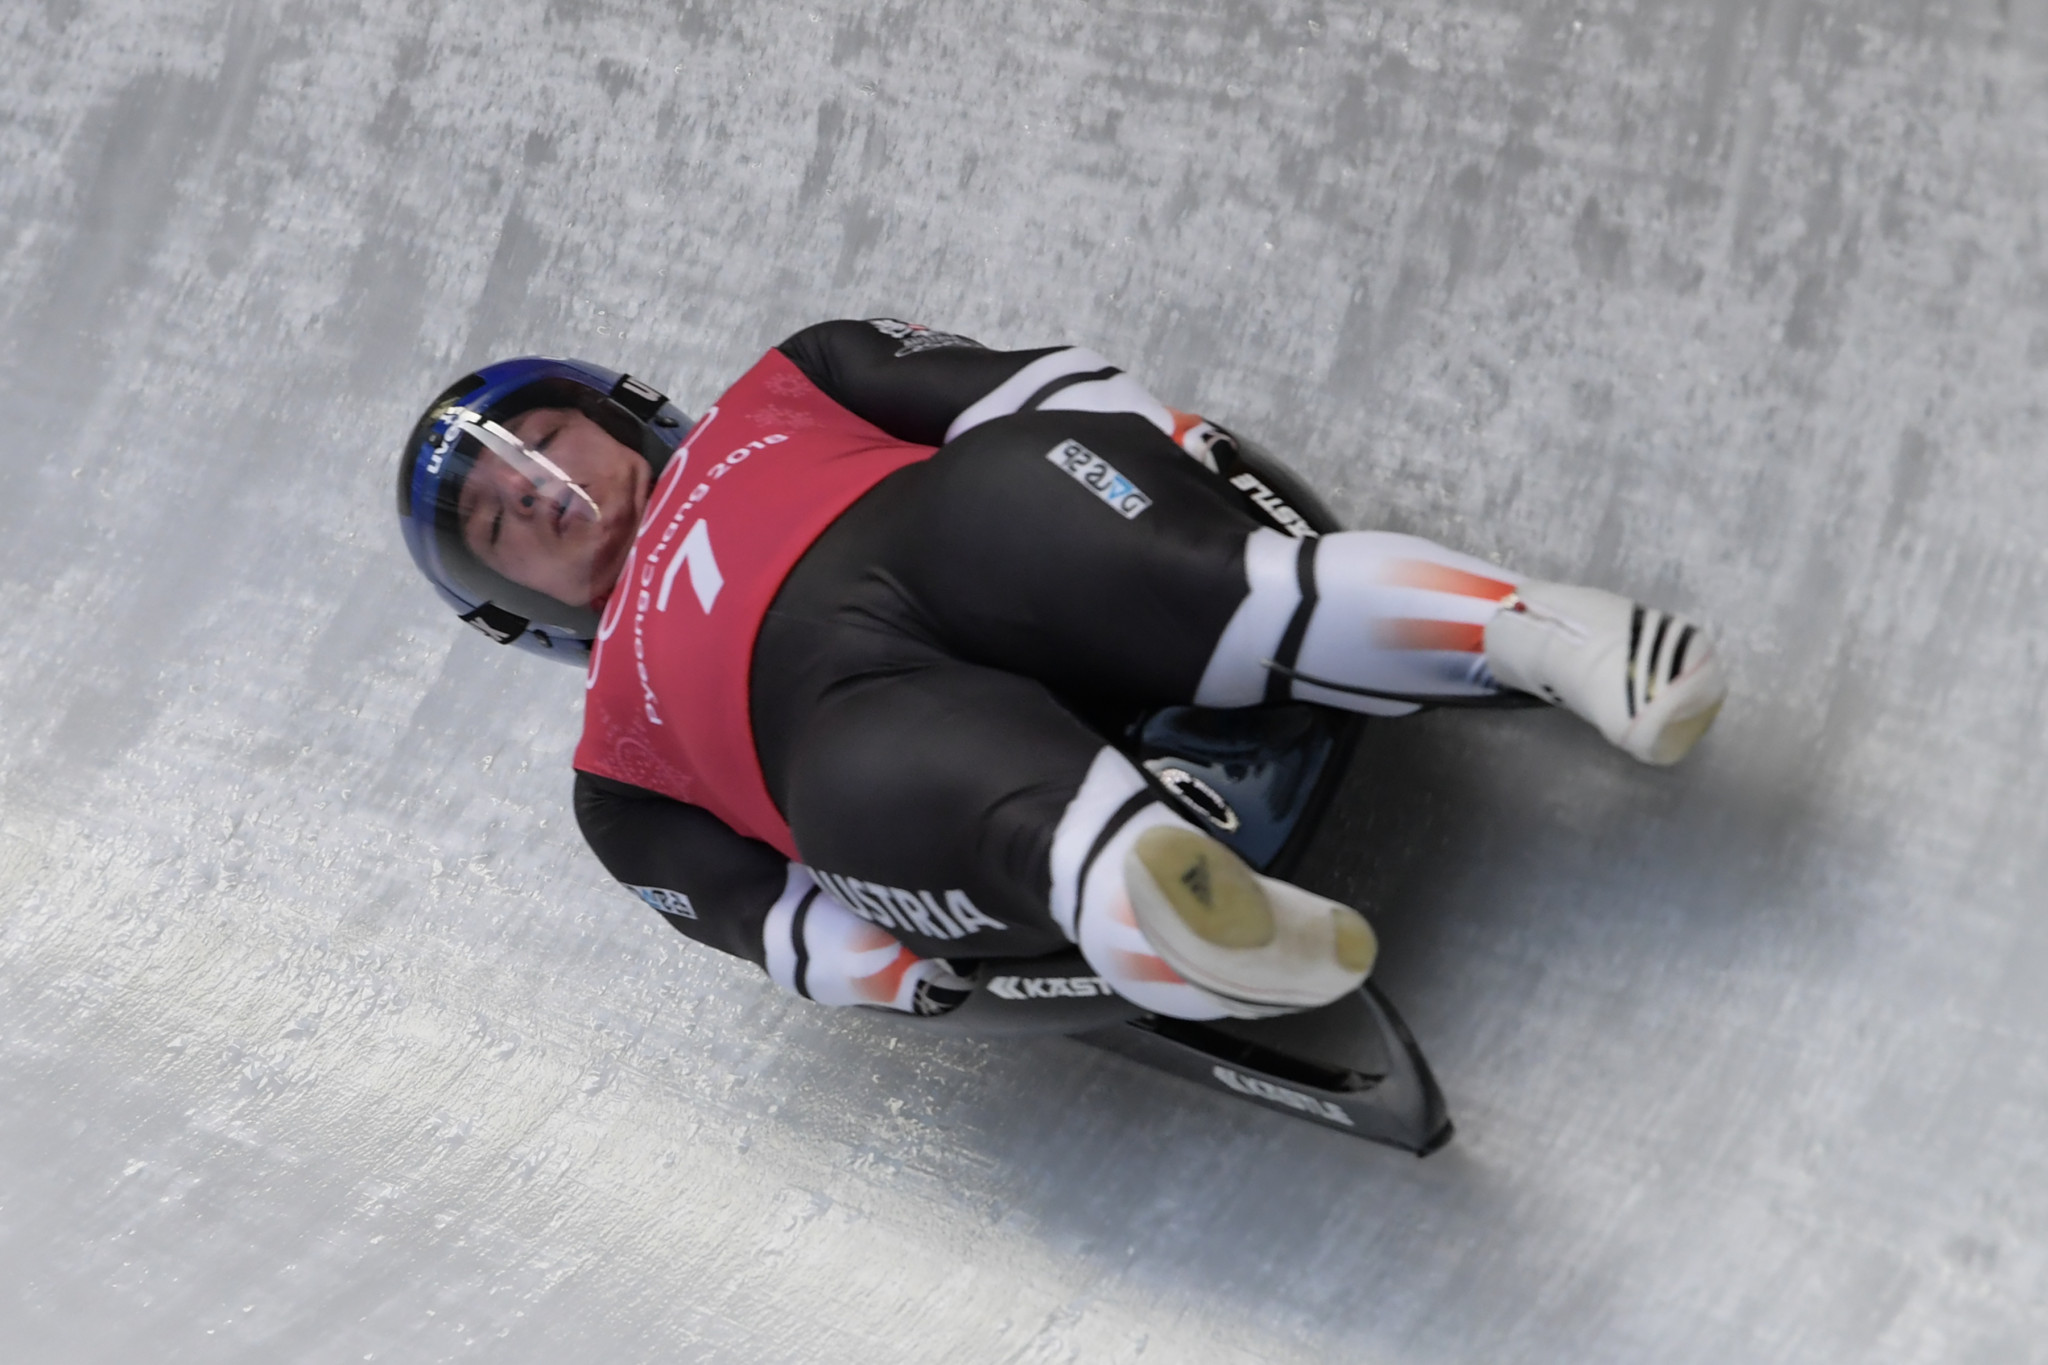 Kindl and Eggert star at Luge World Cup in Whistler